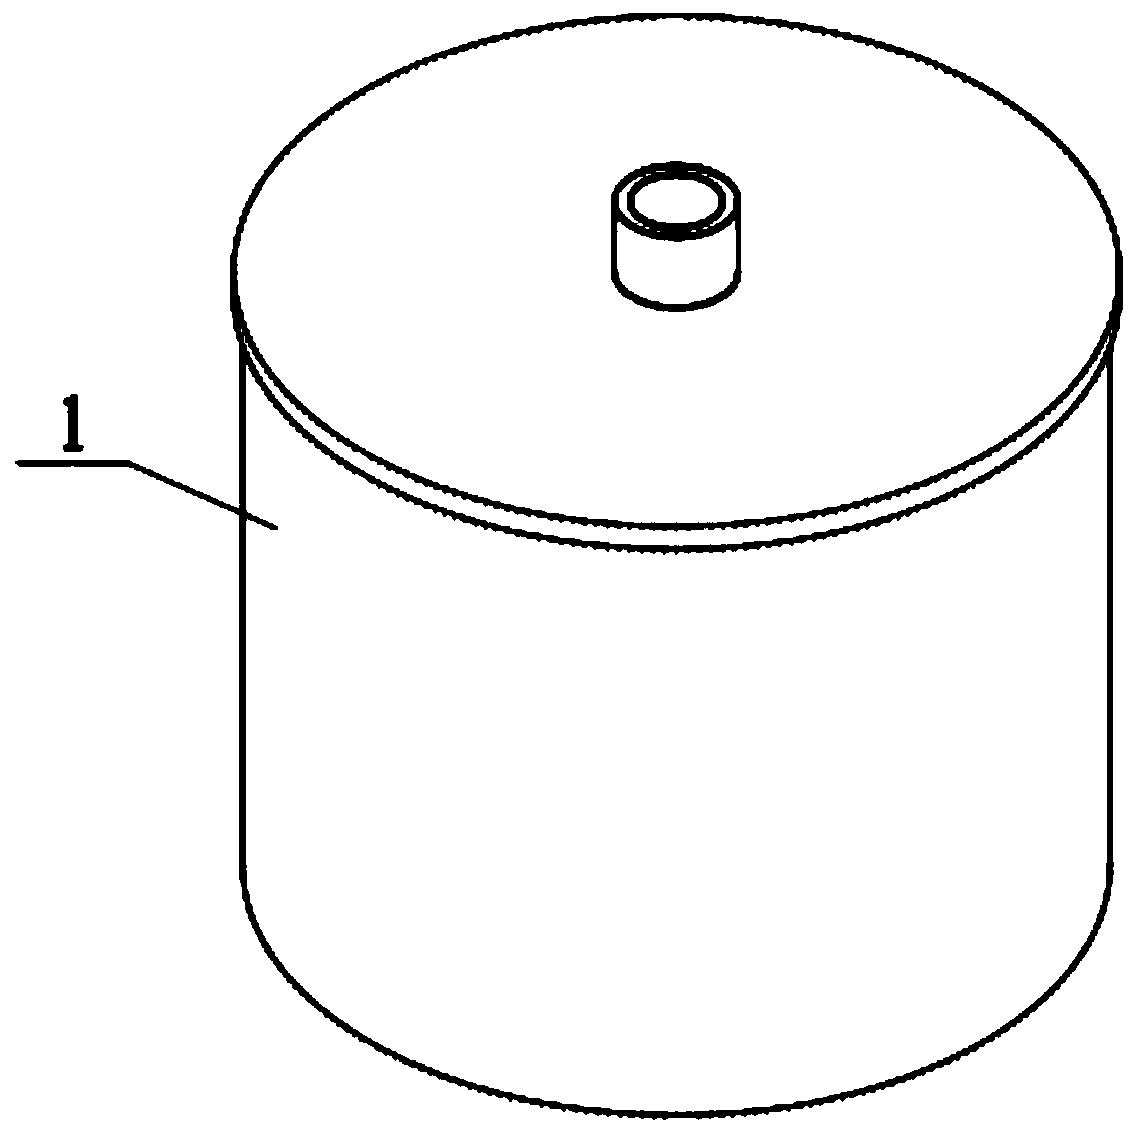 Drinks filling device